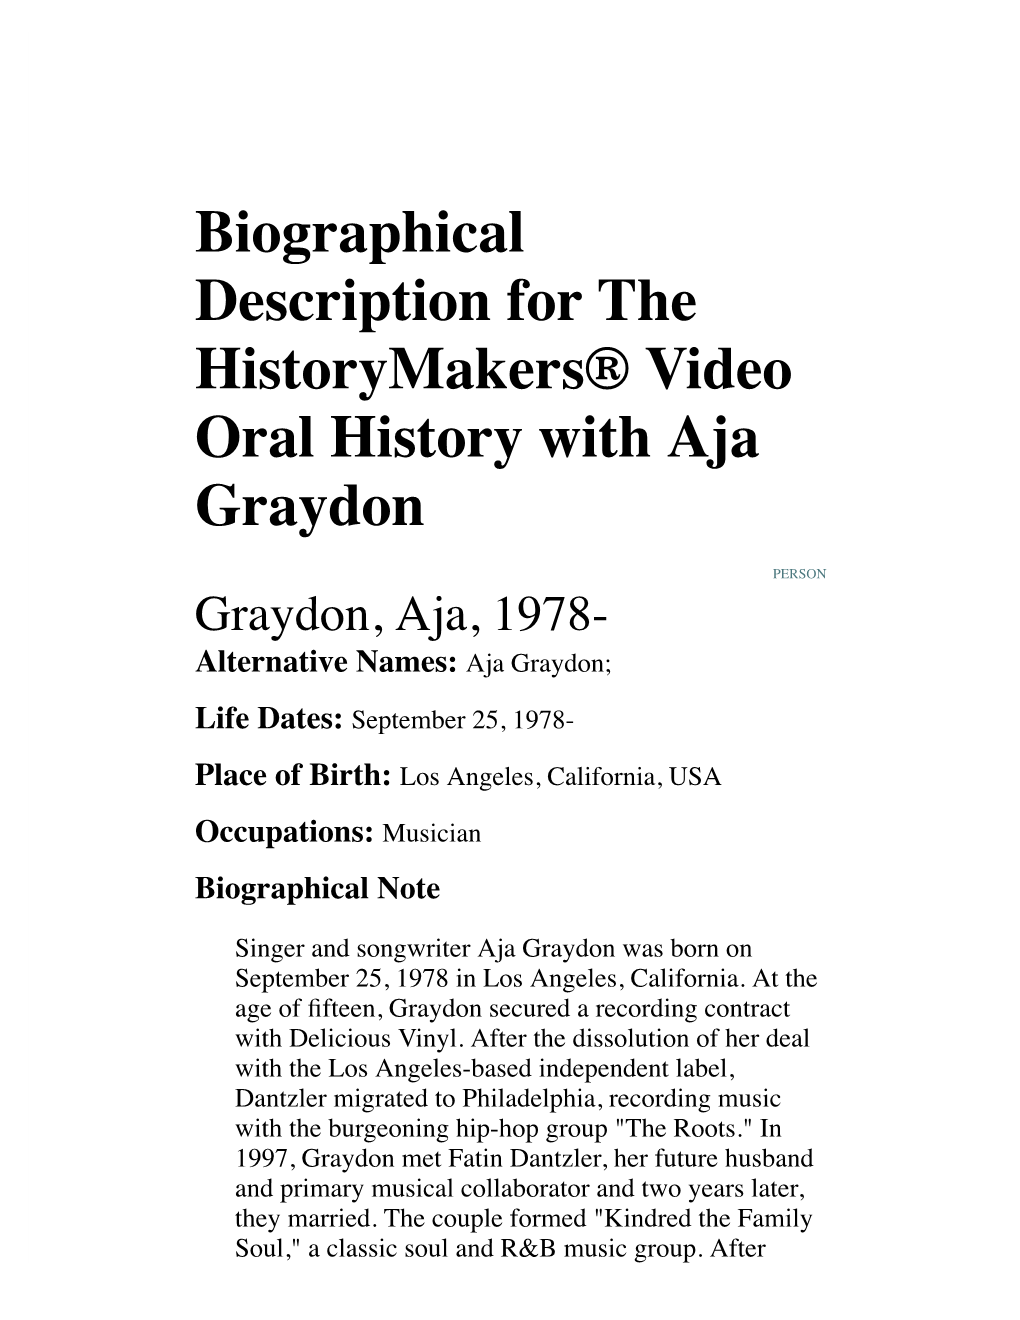 Biographical Description for the Historymakers® Video Oral History with Aja Graydon